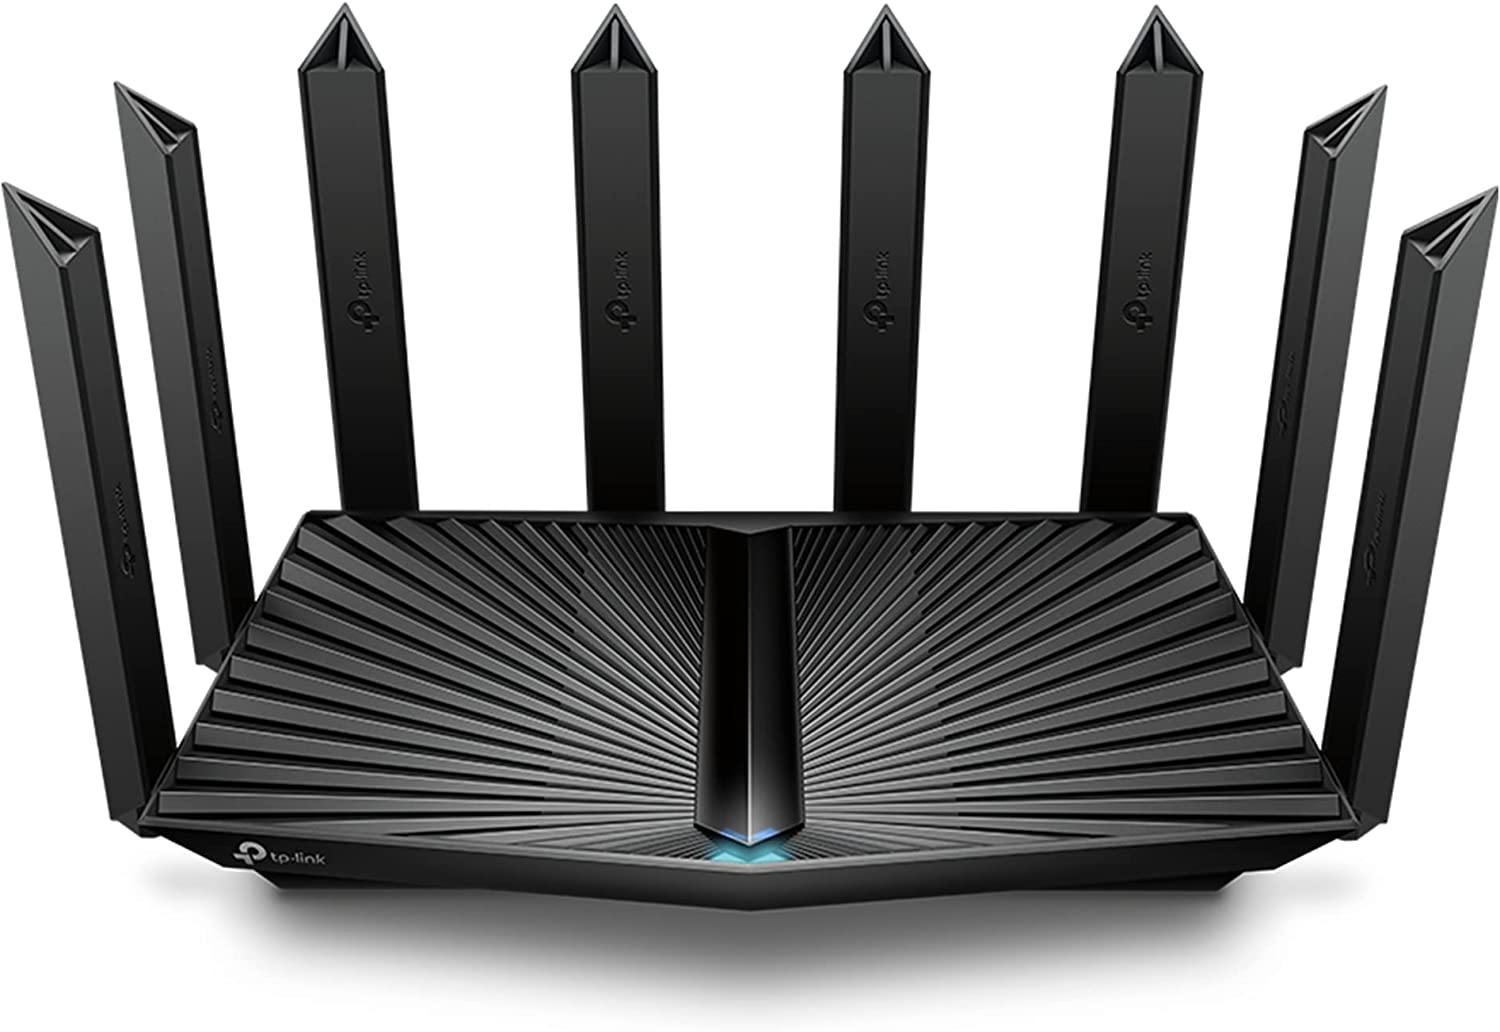 TP-Link AX6000 Wi-Fi 6 Router Dual Band, 2.5 Gbps WAN/LAN Port, 8K Streaming, Wireless Internet Router (Archer AX80)